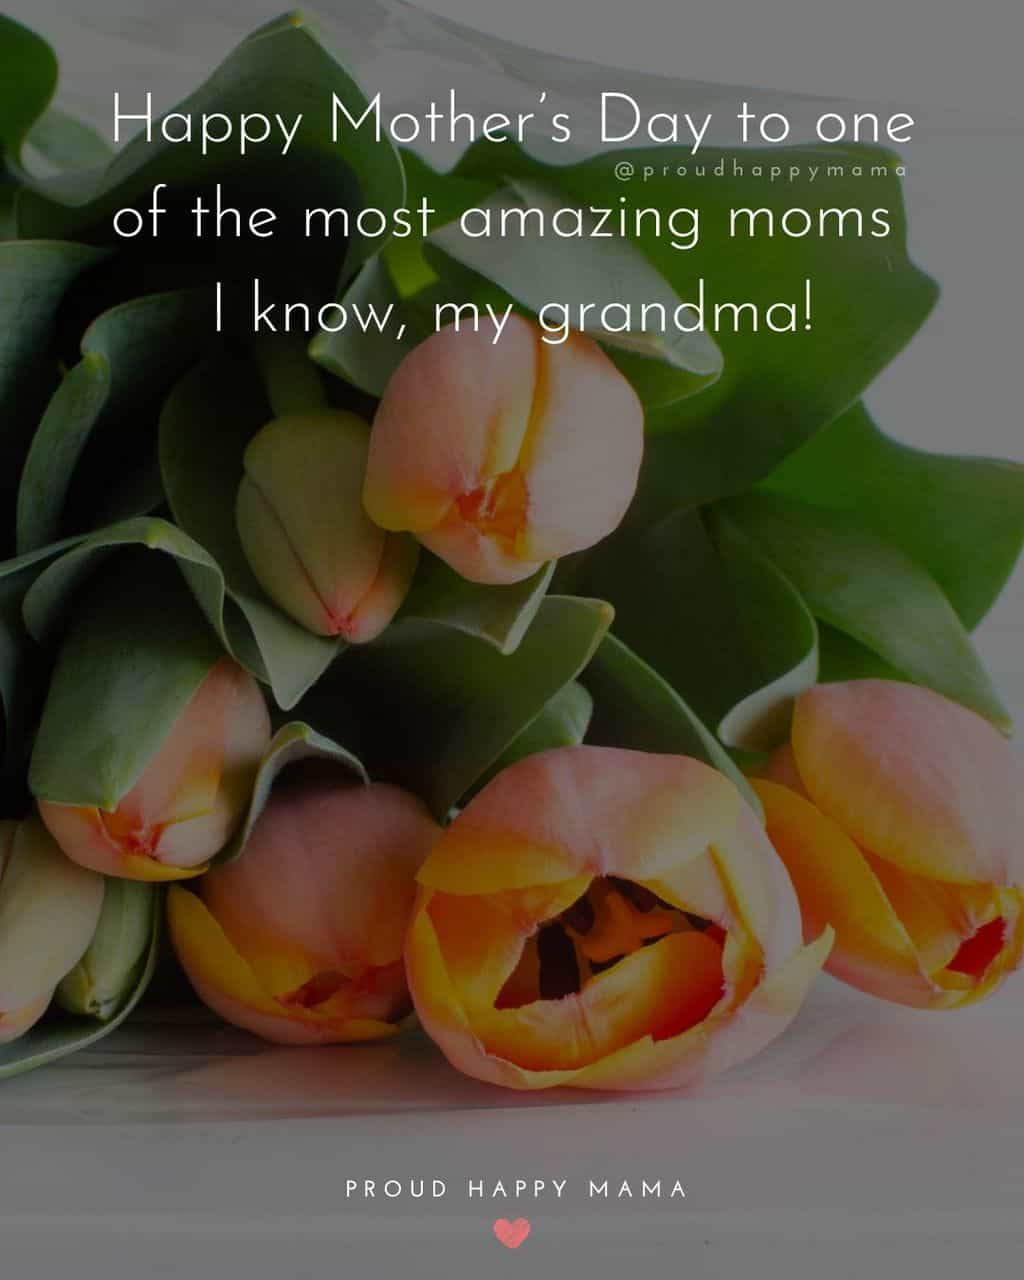 Happy Mothers Day Quotes To Grandma - Happy Mother’s Day to one of the most amazing moms I know, my grandma!’